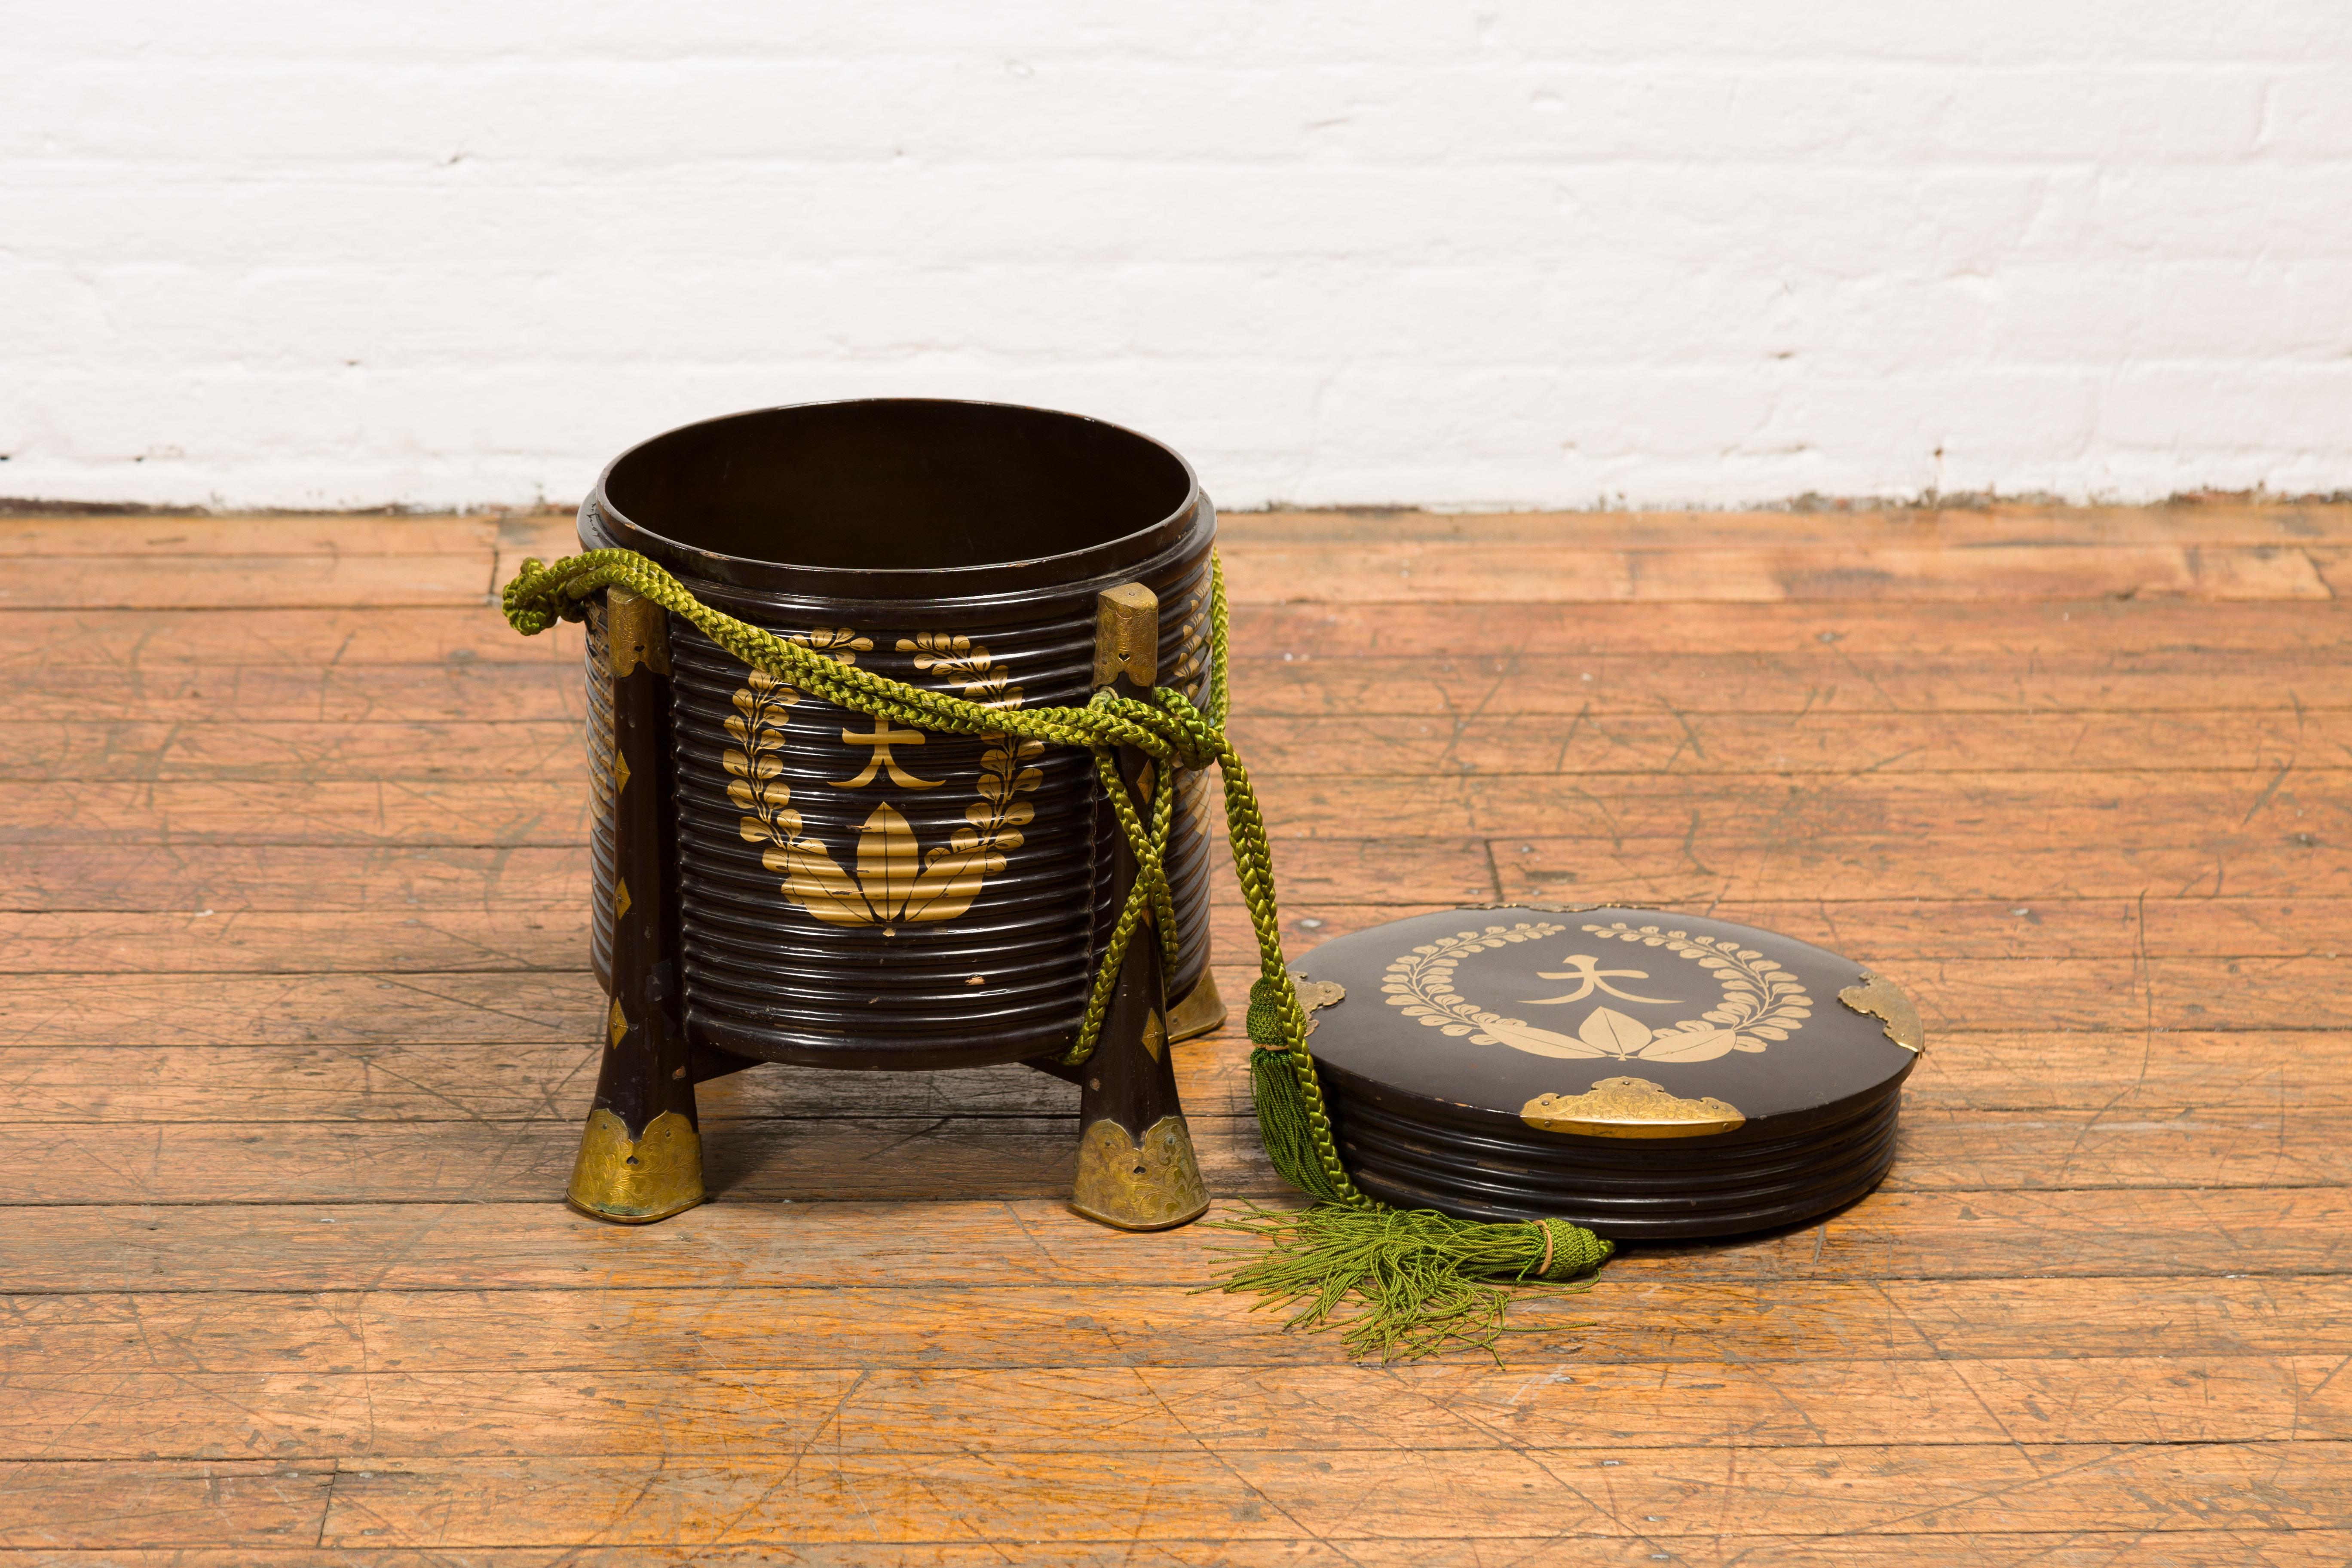 Japanese Meiji Period Hokai Lidded Box with Brass Accents and Original Rope For Sale 4